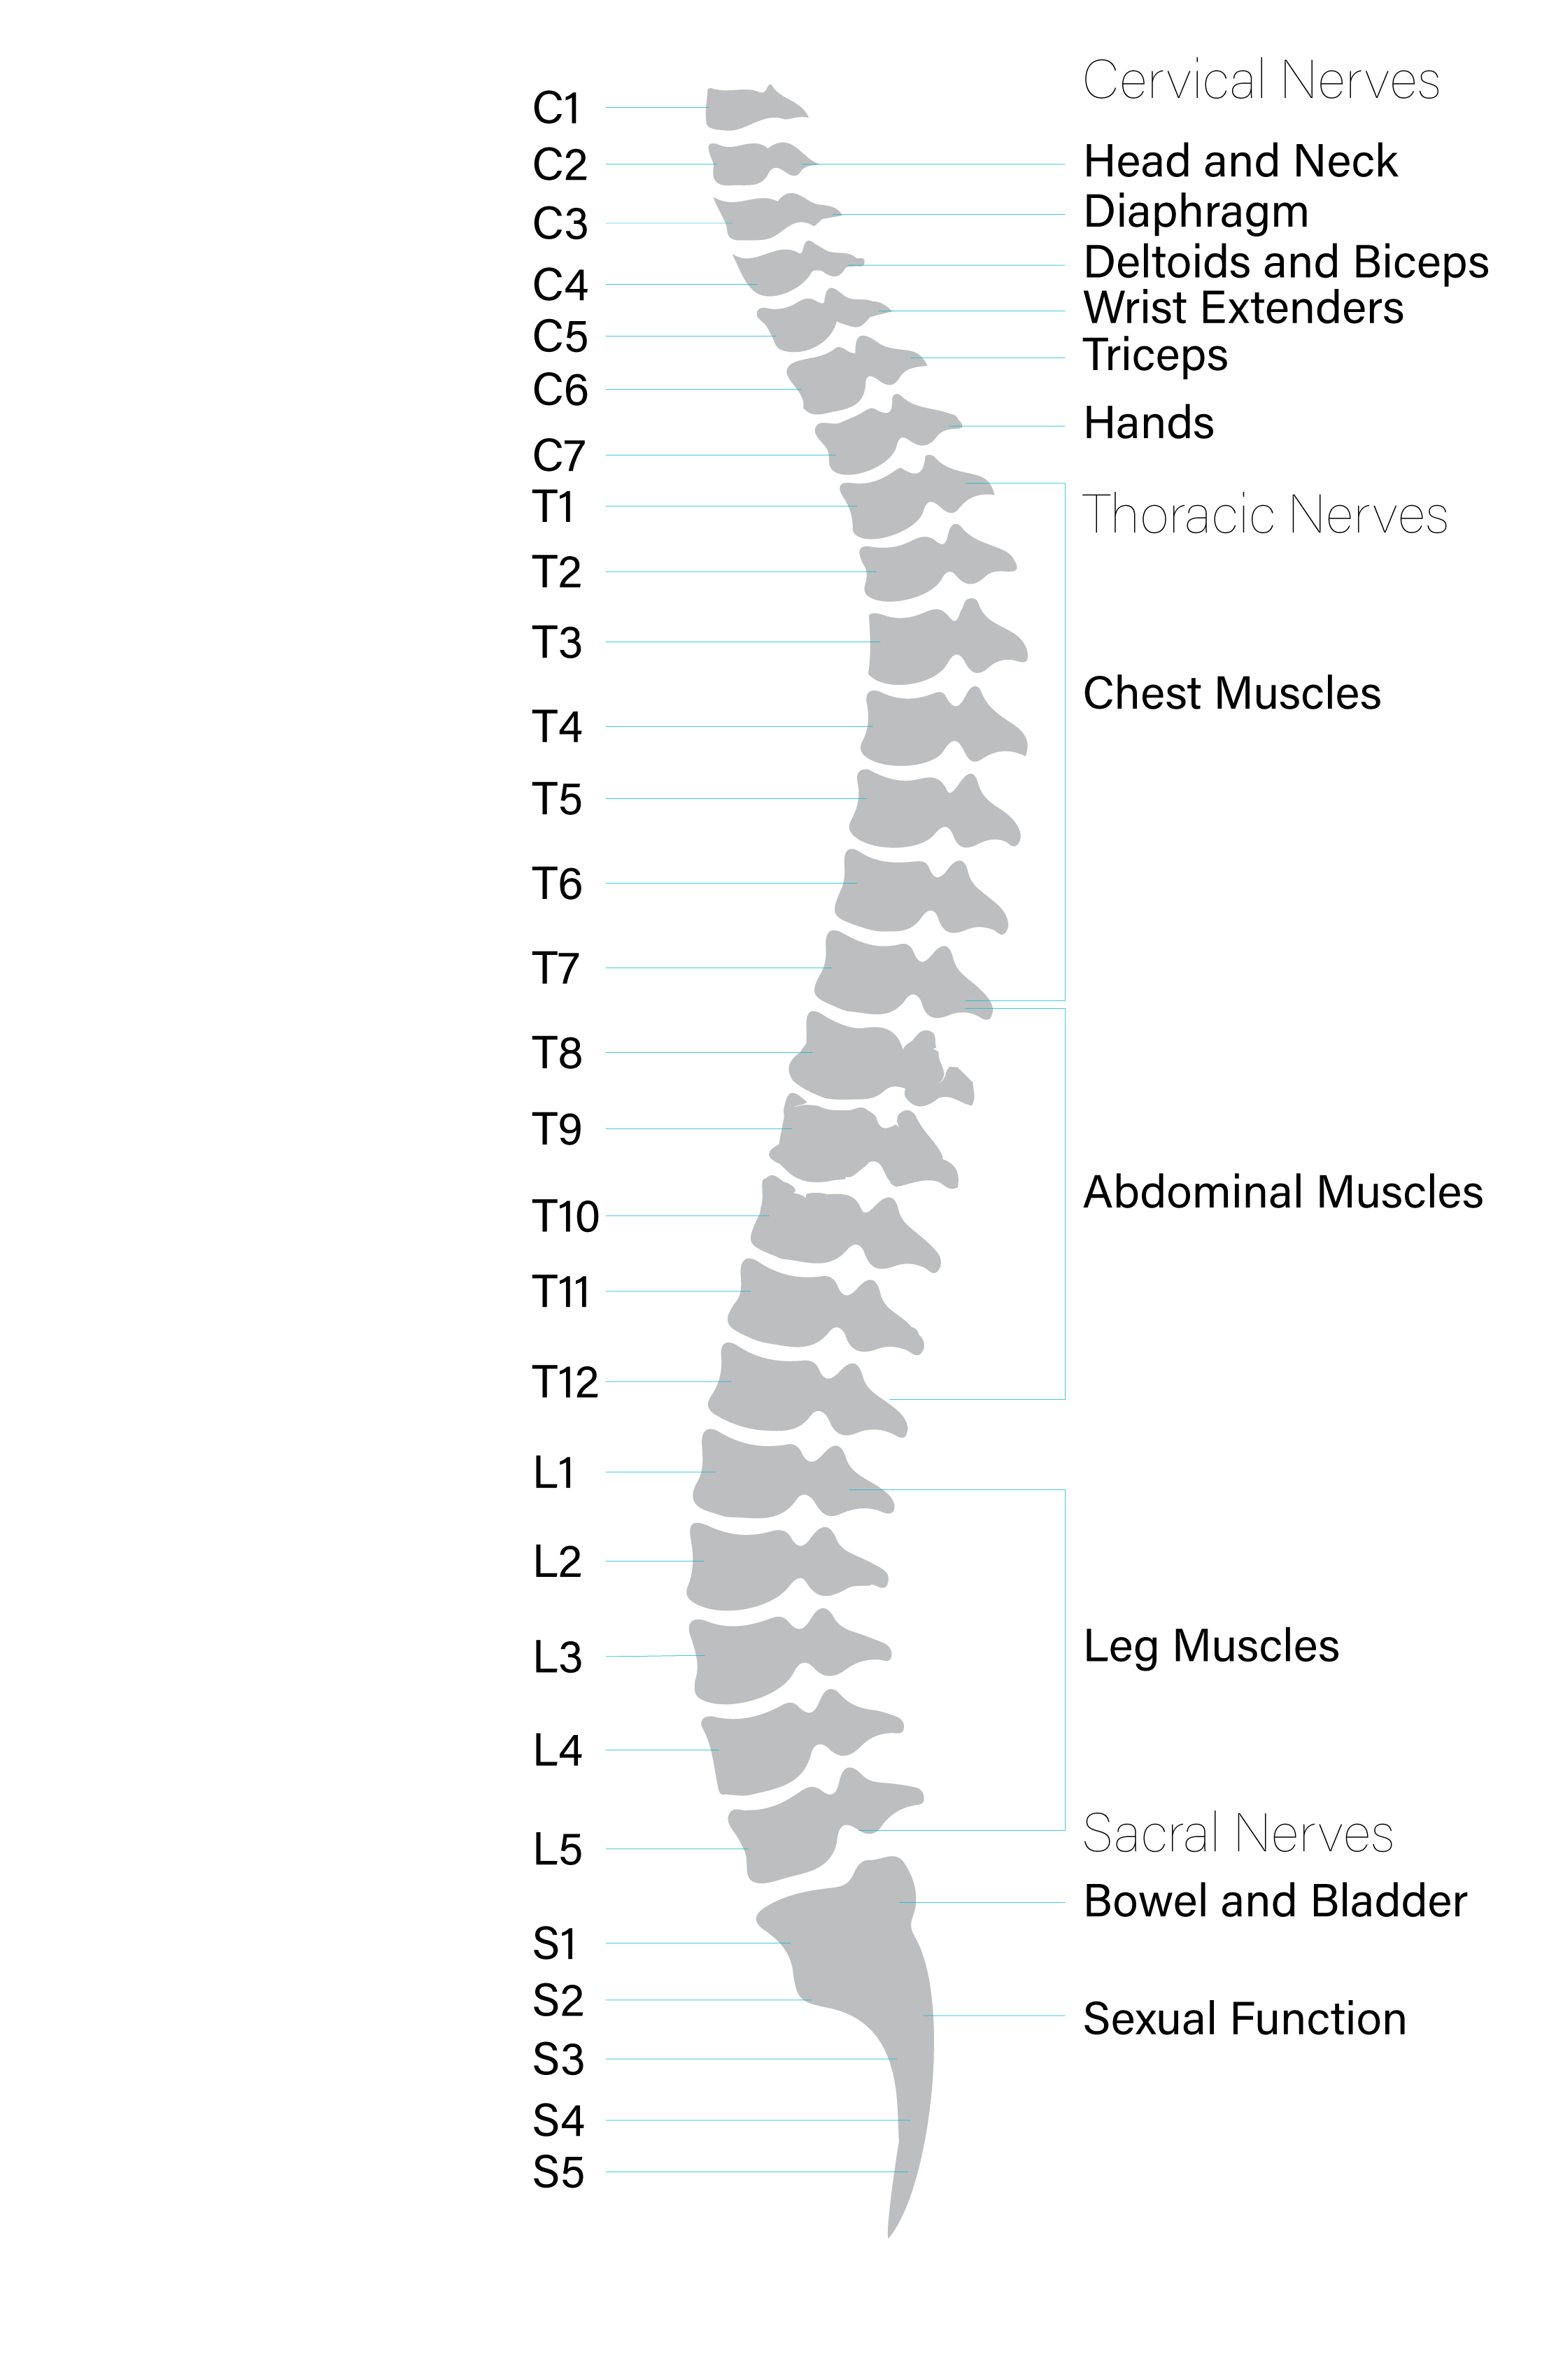 Anatomy of the Spinal Cord - Praxis Spinal Cord Institute